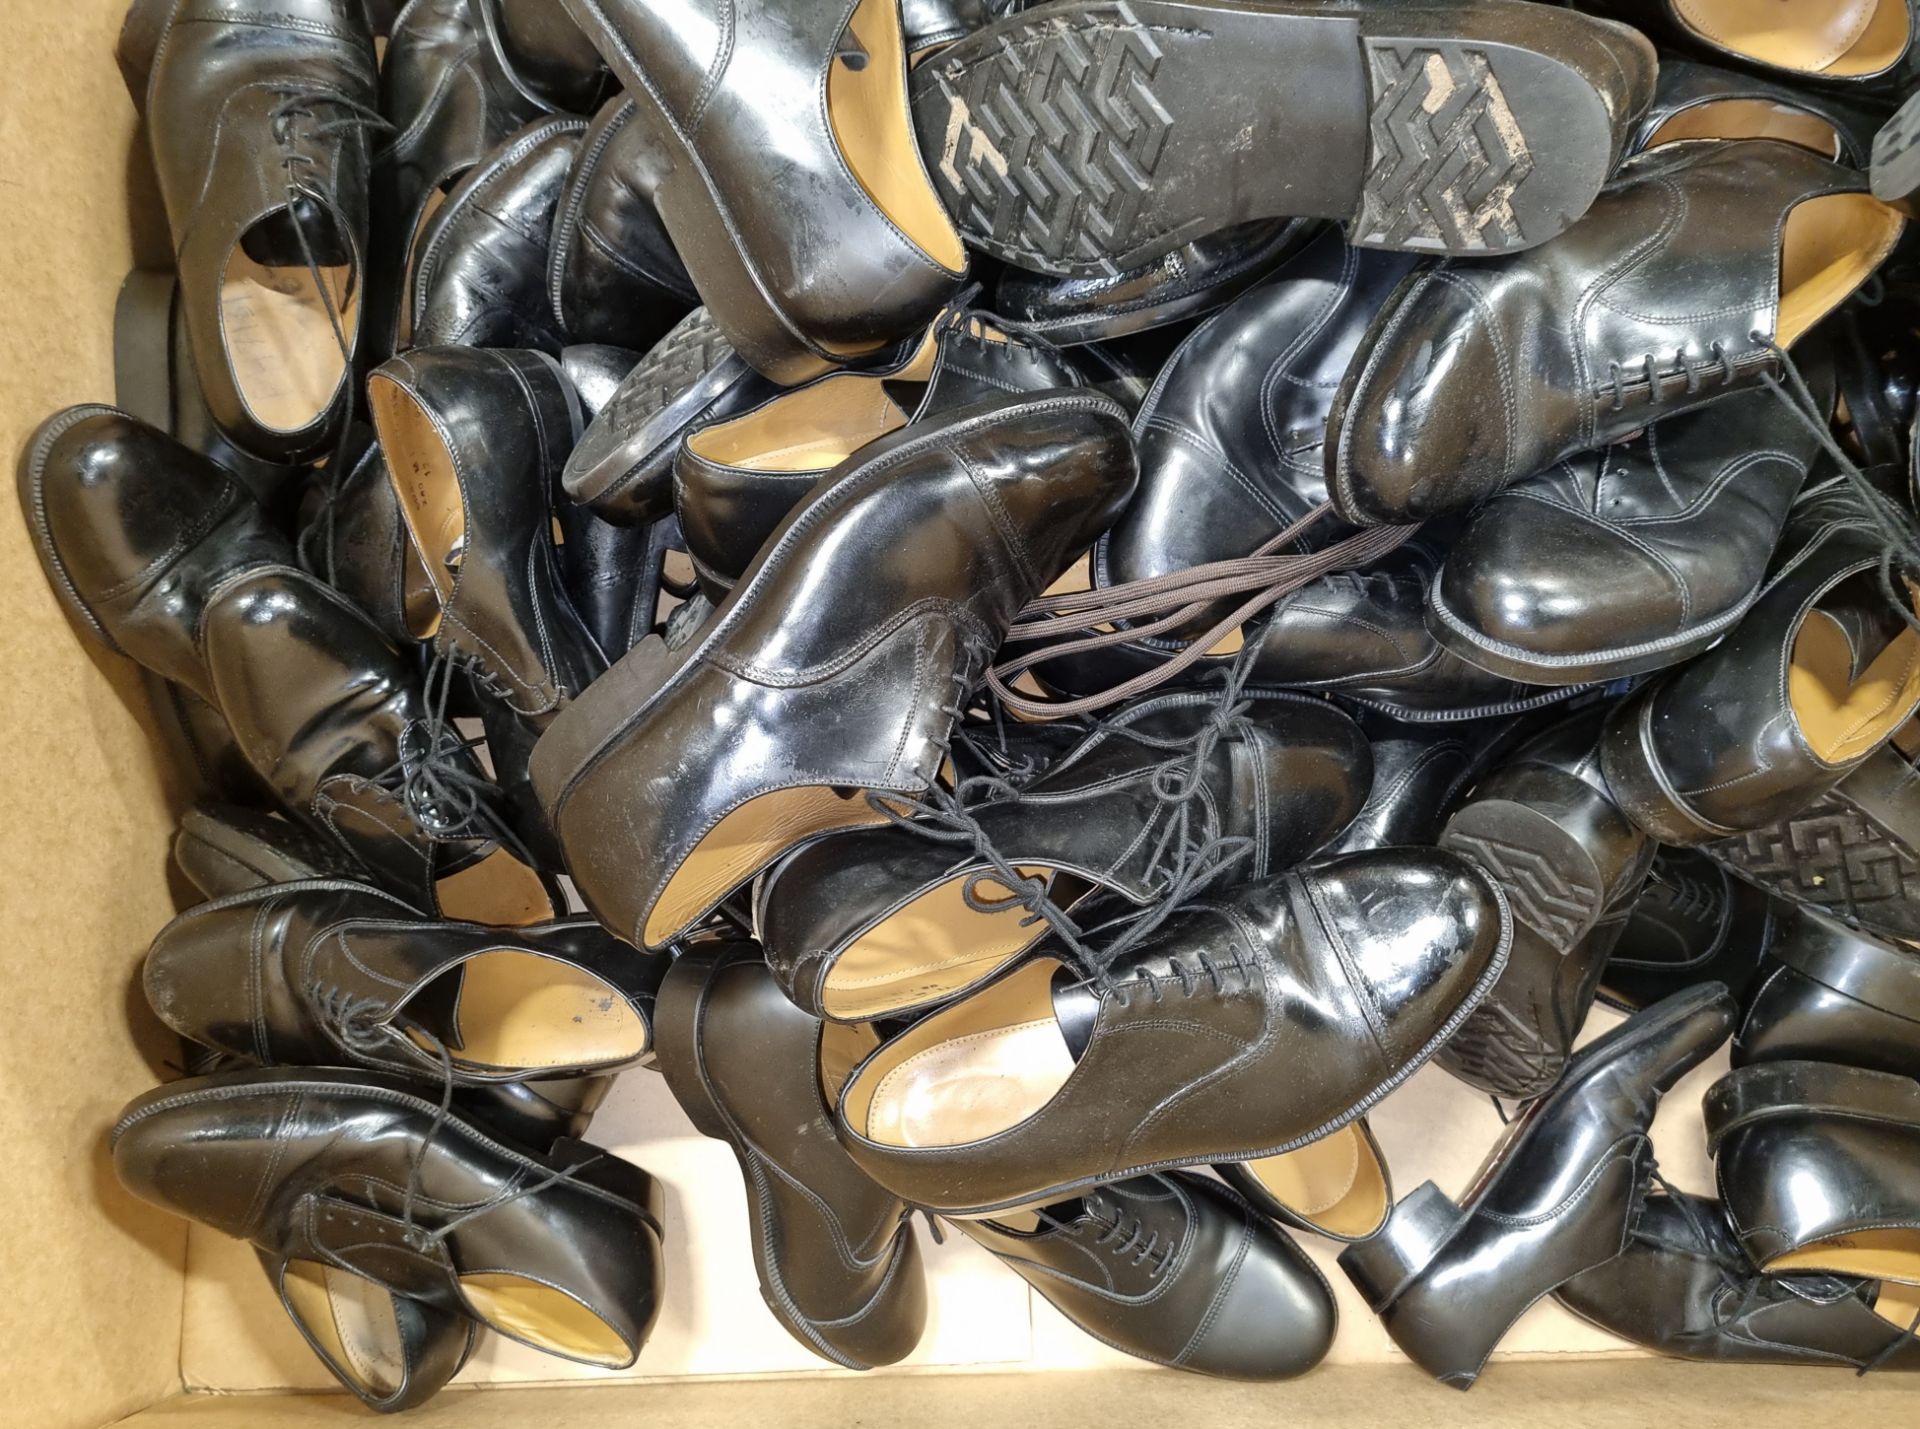 50x pairs of various shoes - different makes & sizes - mixed grades - Image 5 of 5